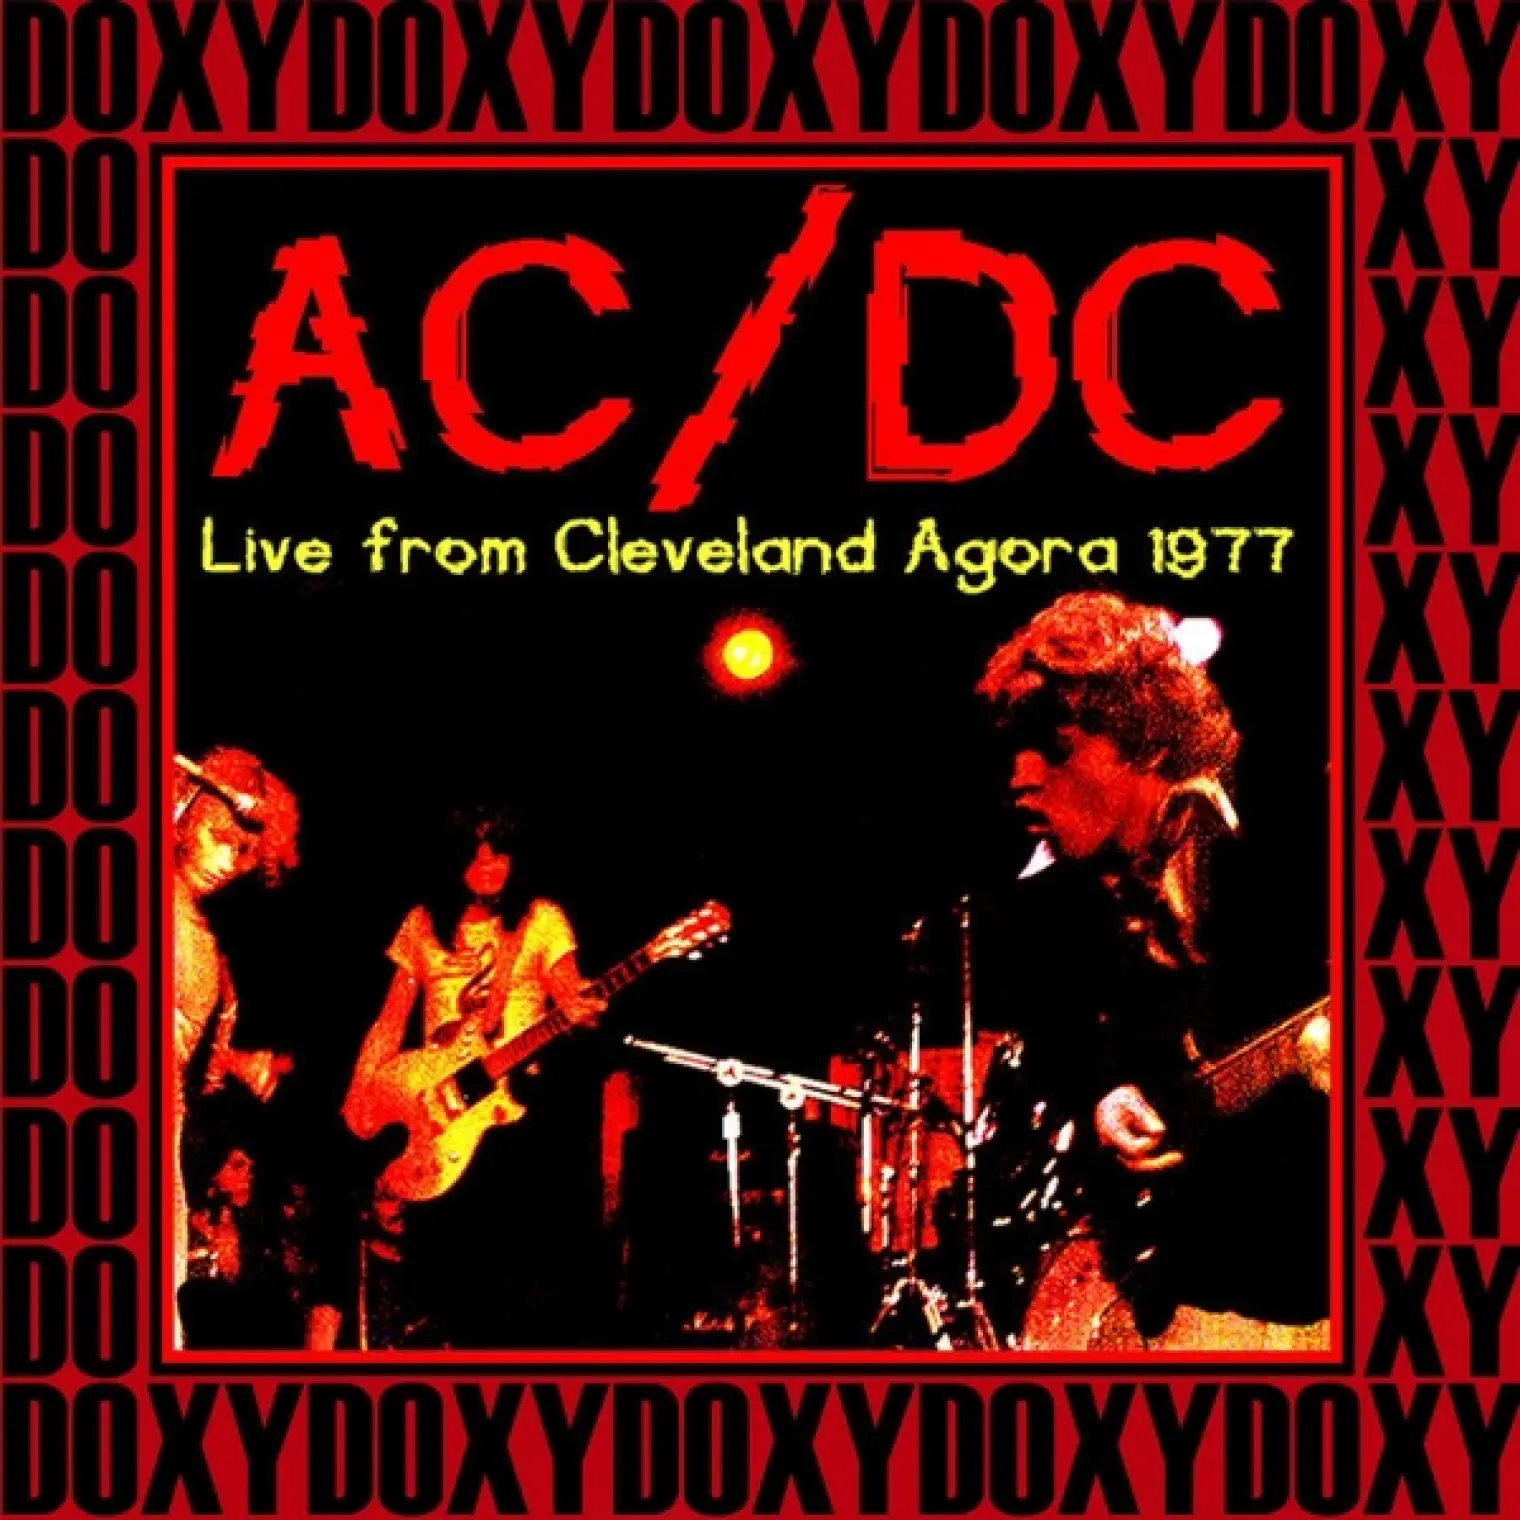 Agora Ballroom, Cleveland, August 22nd, 1977 (Doxy Collection, Remastered, Live on Fm Broadcasting) -  AC/DC 